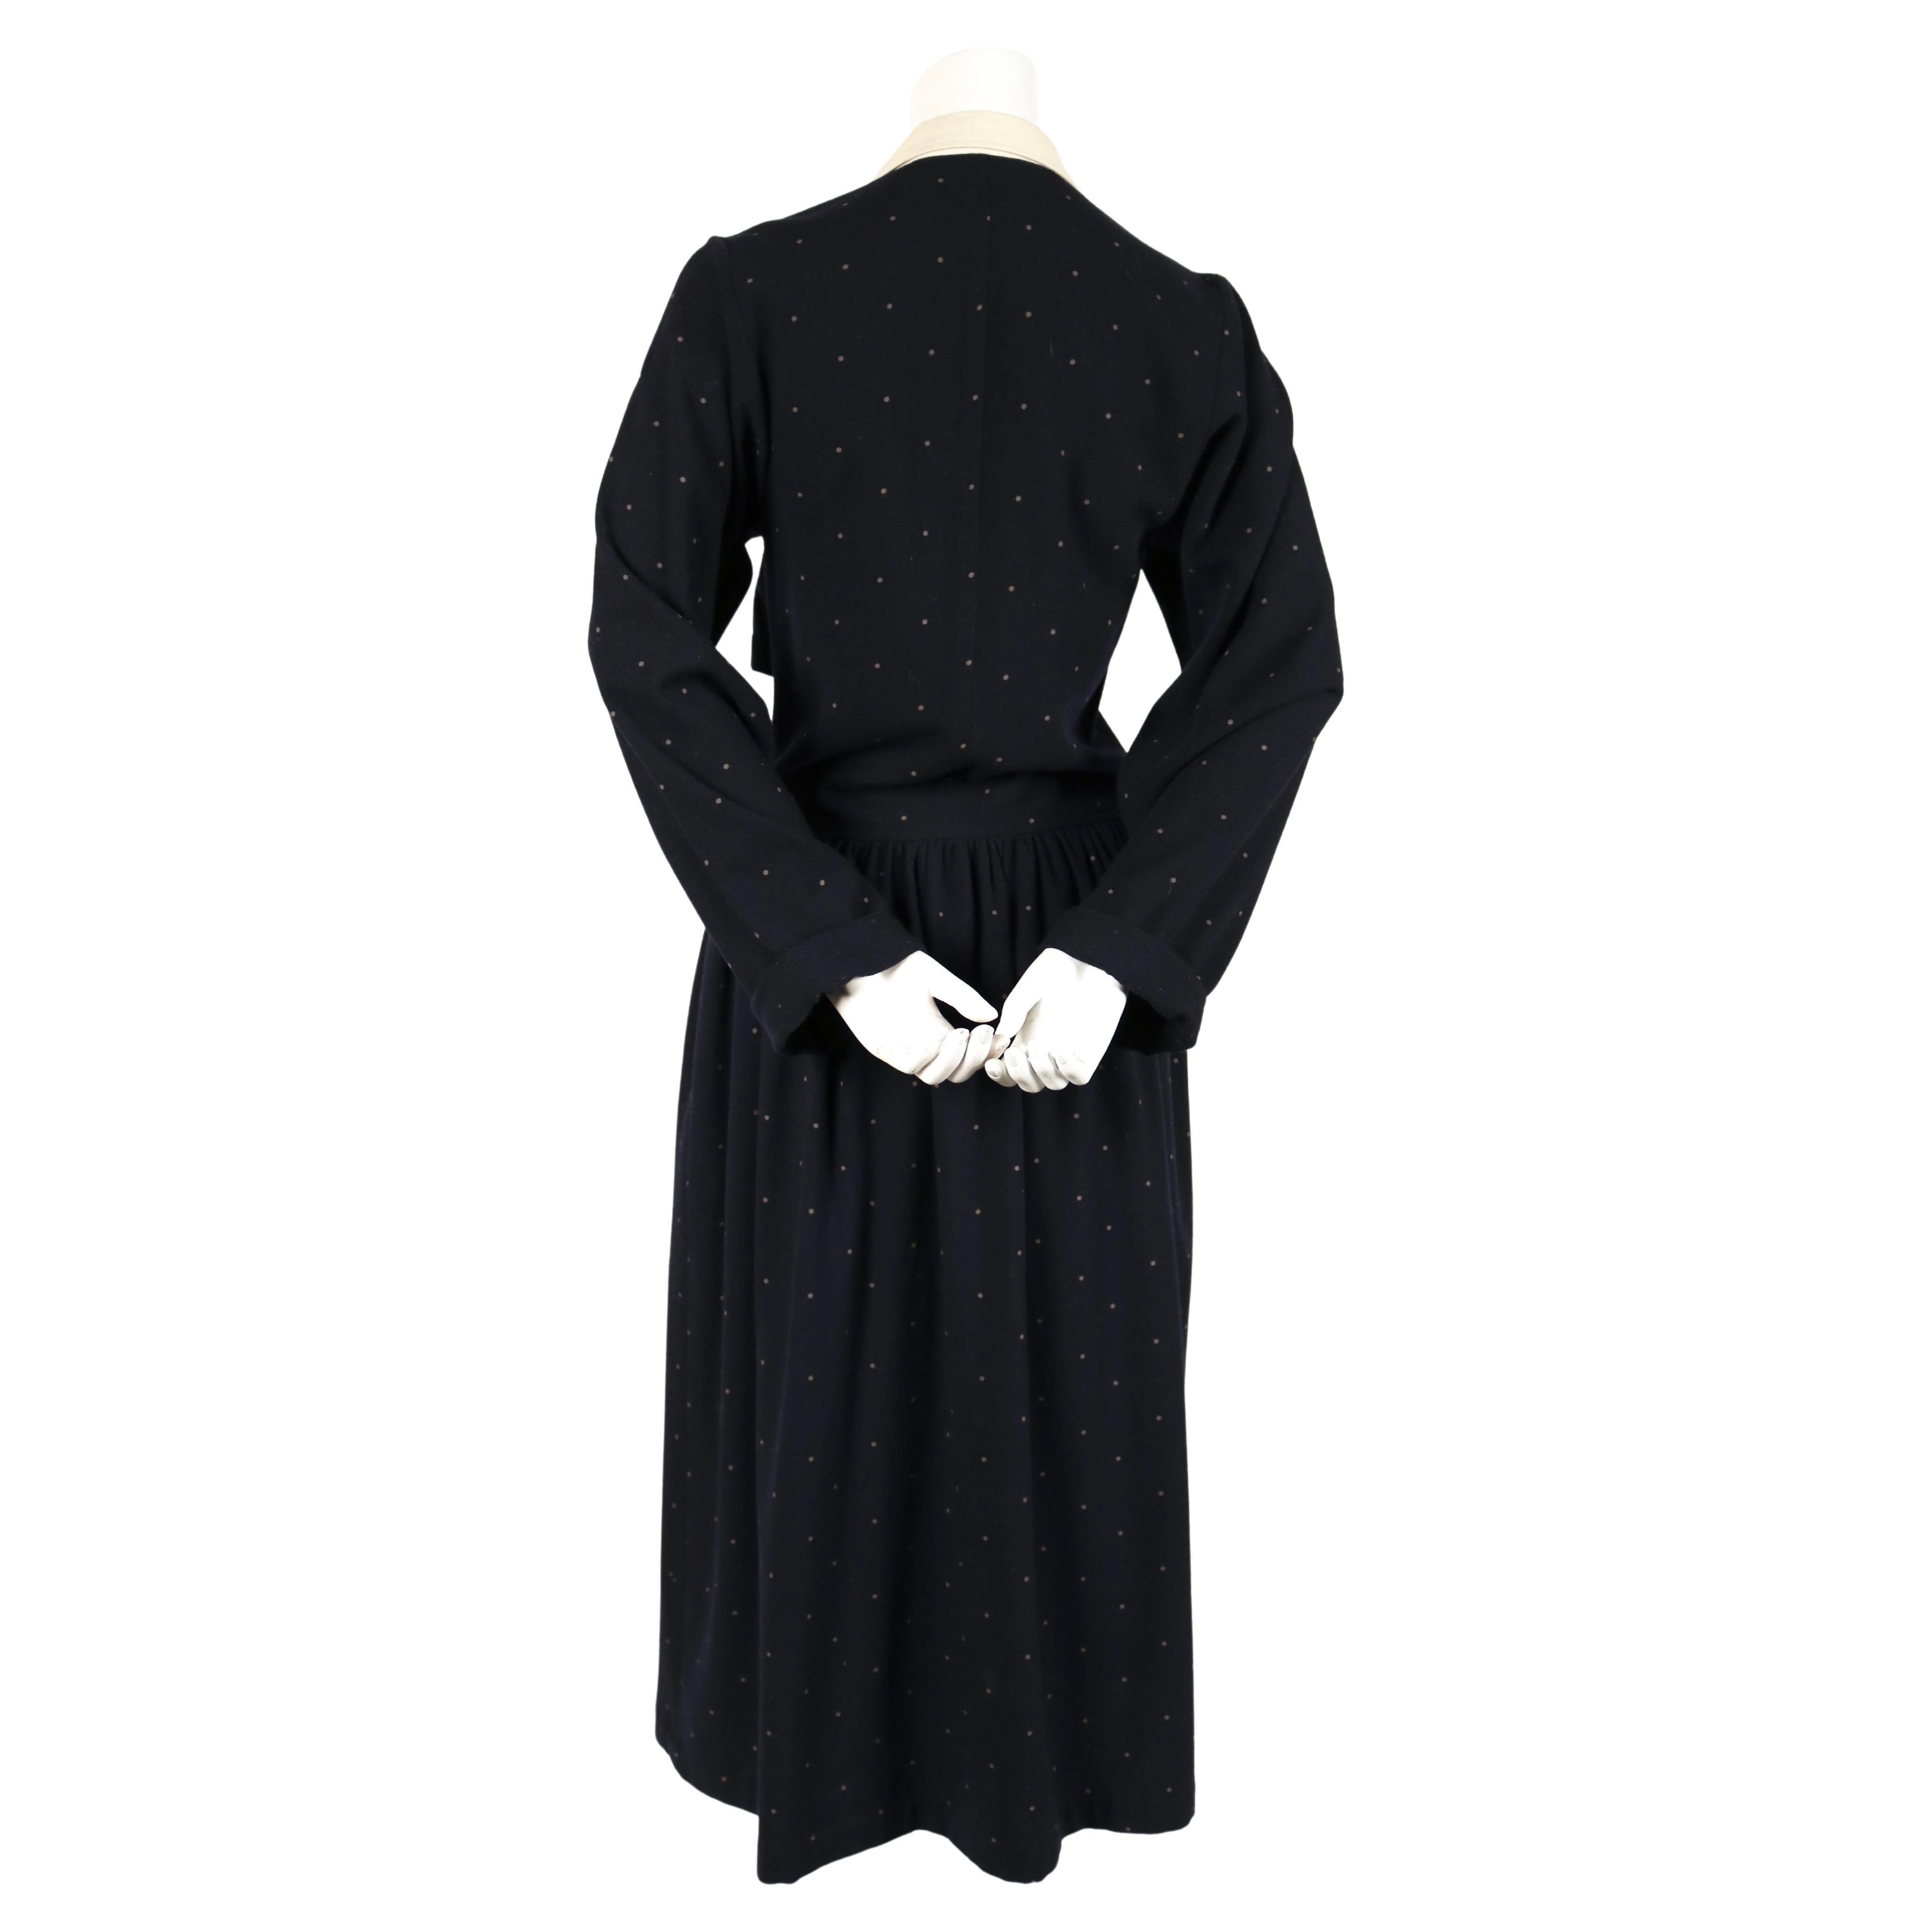 1985 COMME DES GARCONS navy wool draped dress with polka dots 1